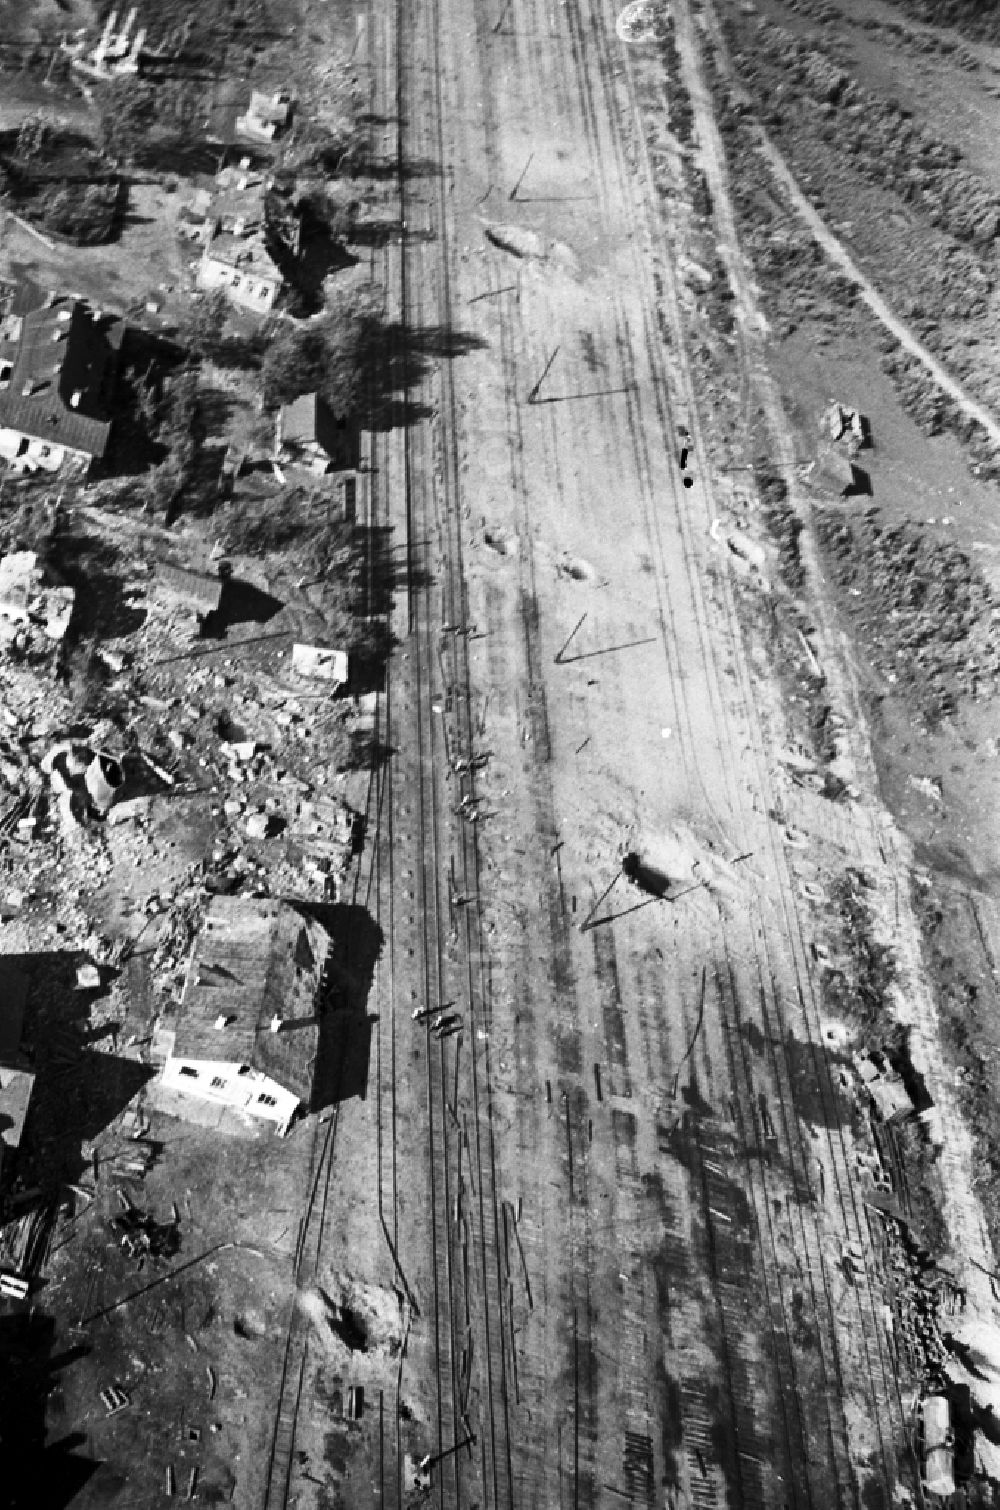 Luhansk from above - Hits and damage documentation of the acts of war from attacks by the german air force in Luhansk Donezk in Ukraine